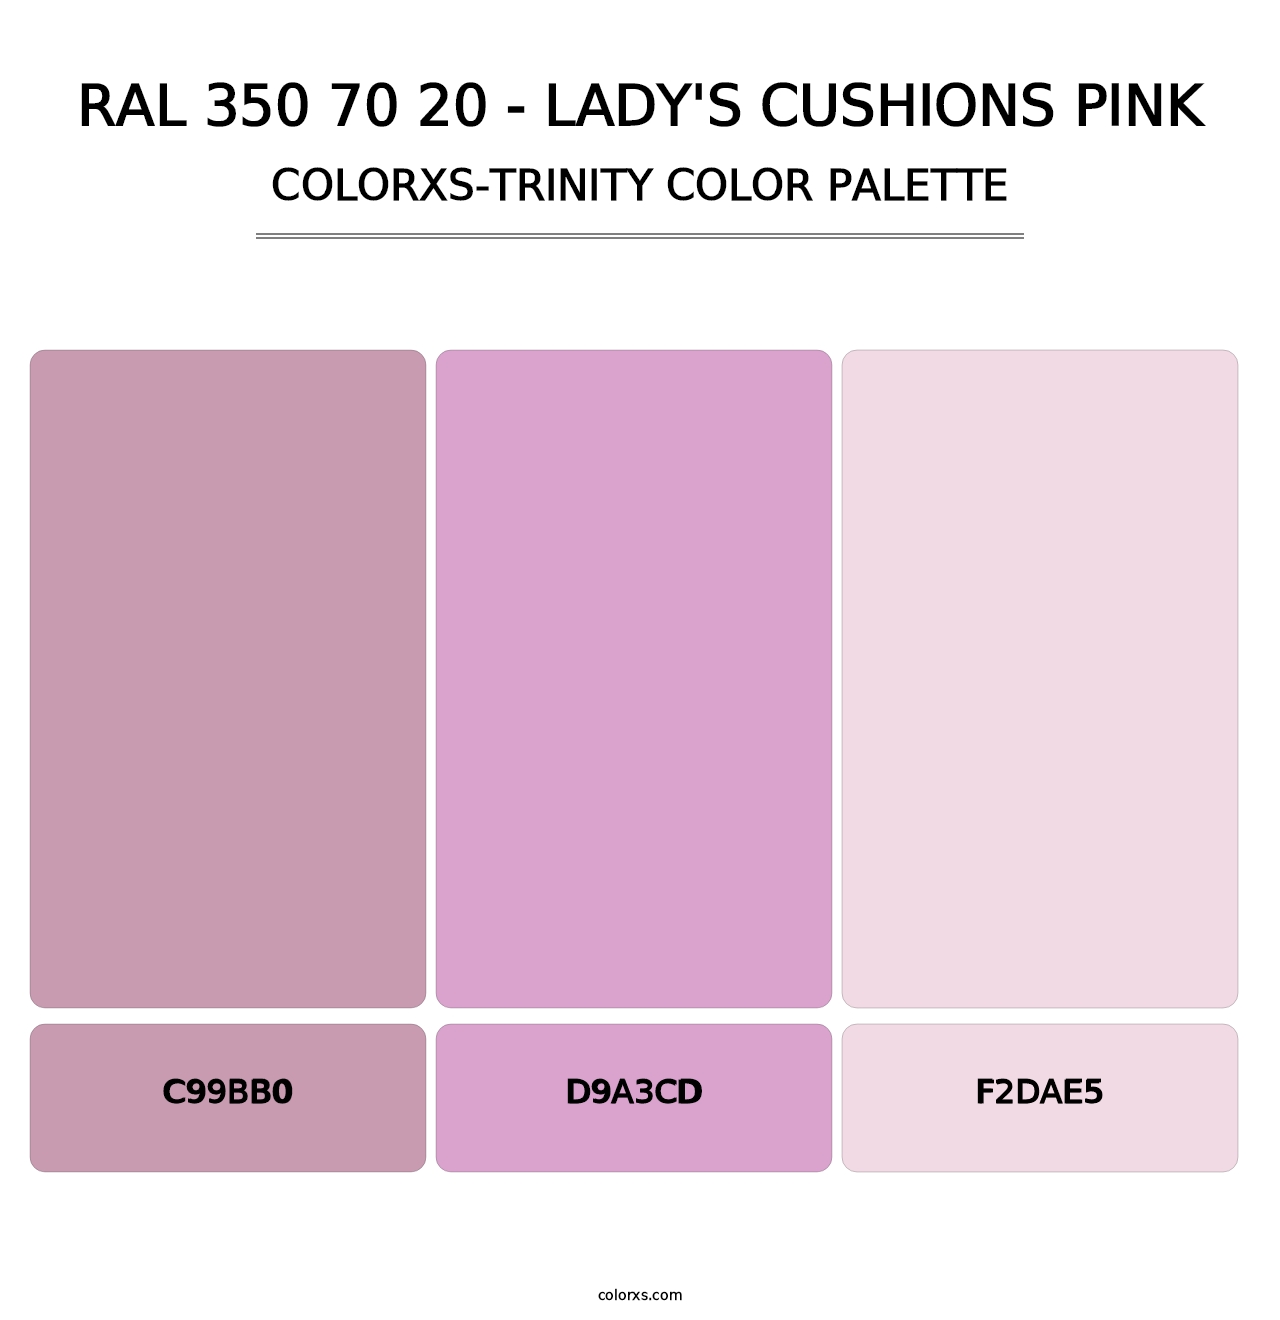 RAL 350 70 20 - Lady's Cushions Pink - Colorxs Trinity Palette